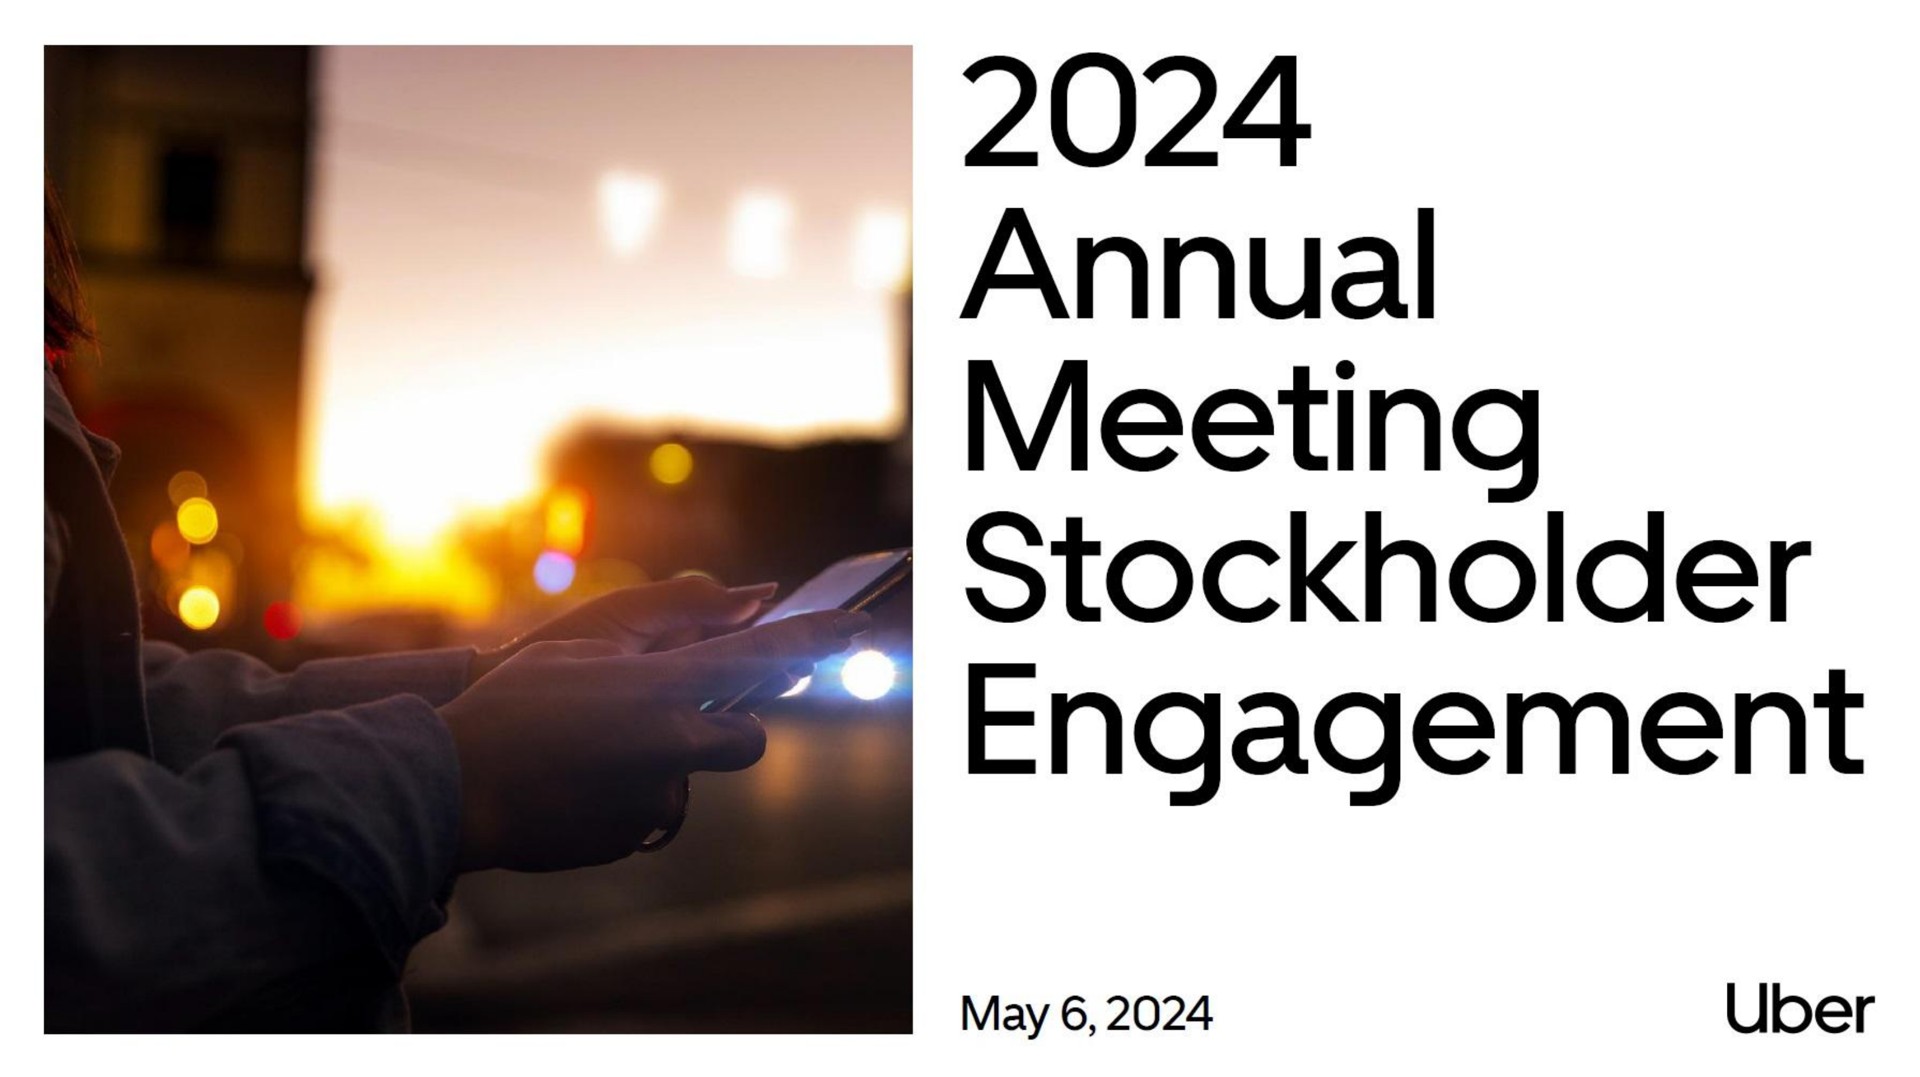 annual meeting stockholder engagement may | Uber